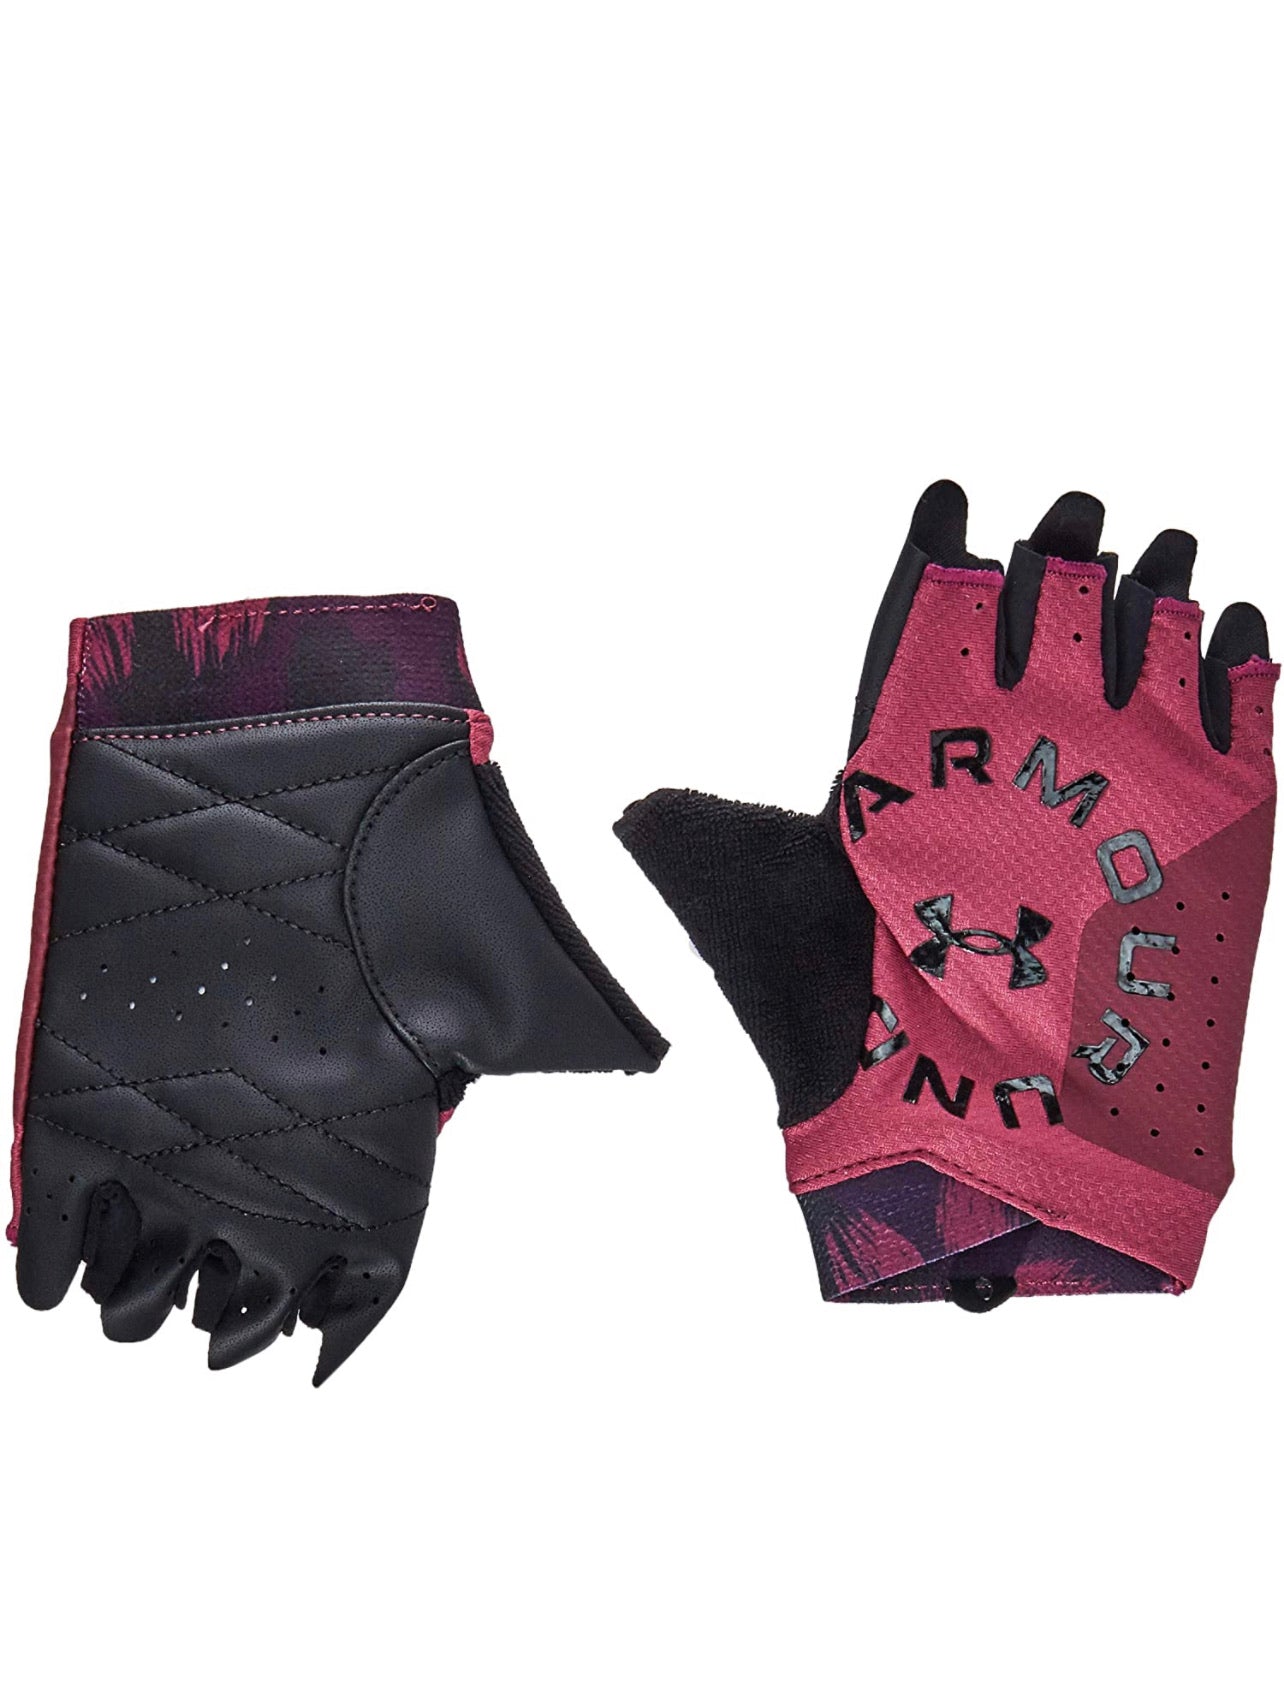 Womans training gloves Under Armour guantes